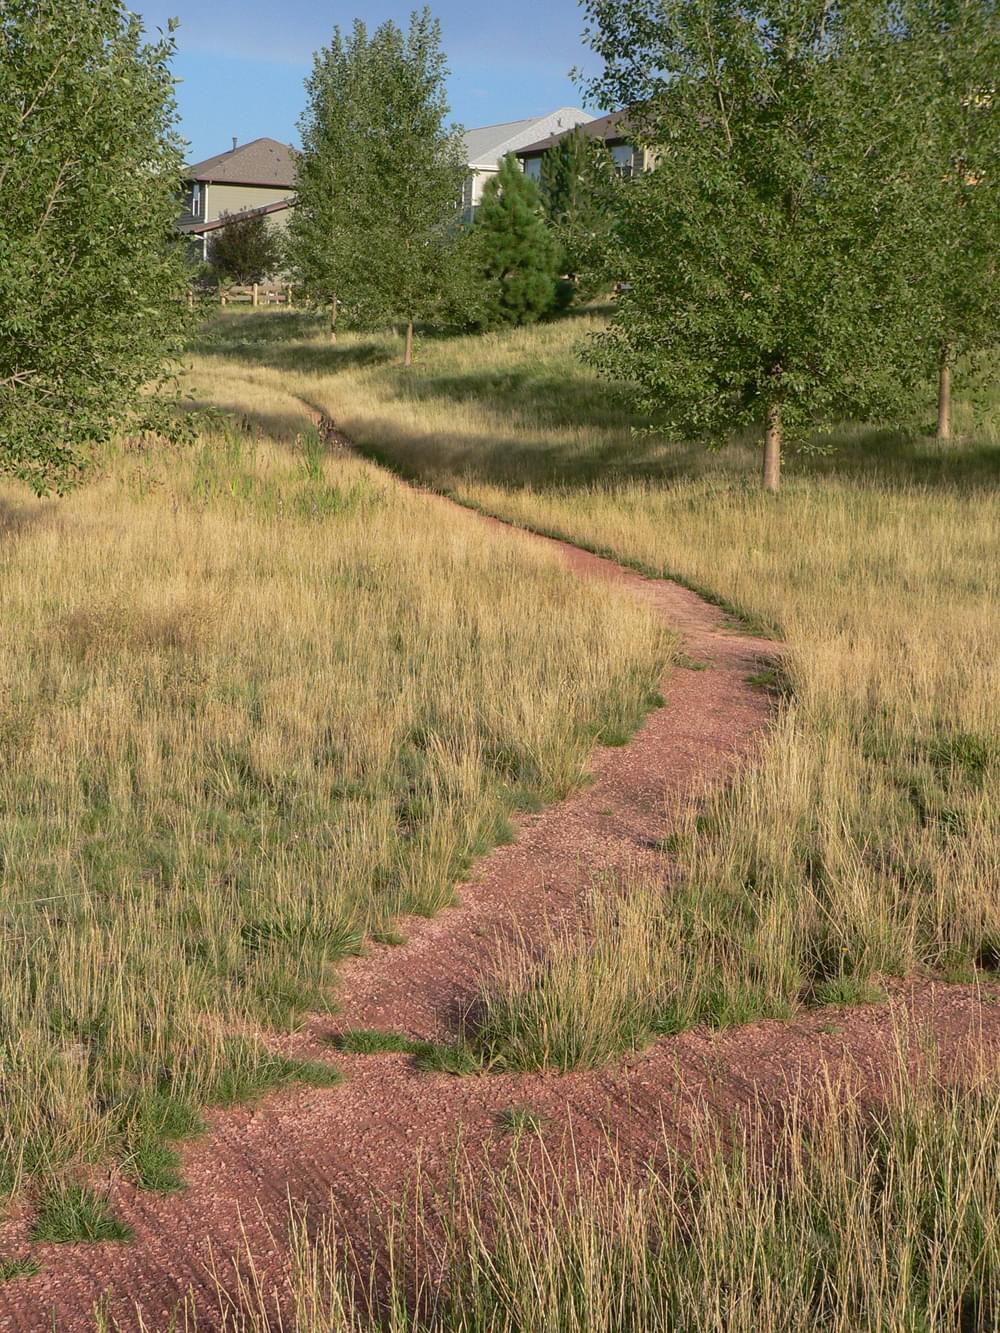 Narrow crusher fines trails provide neighborhood access to open space along Little Dry Creek in Arvada, CO.